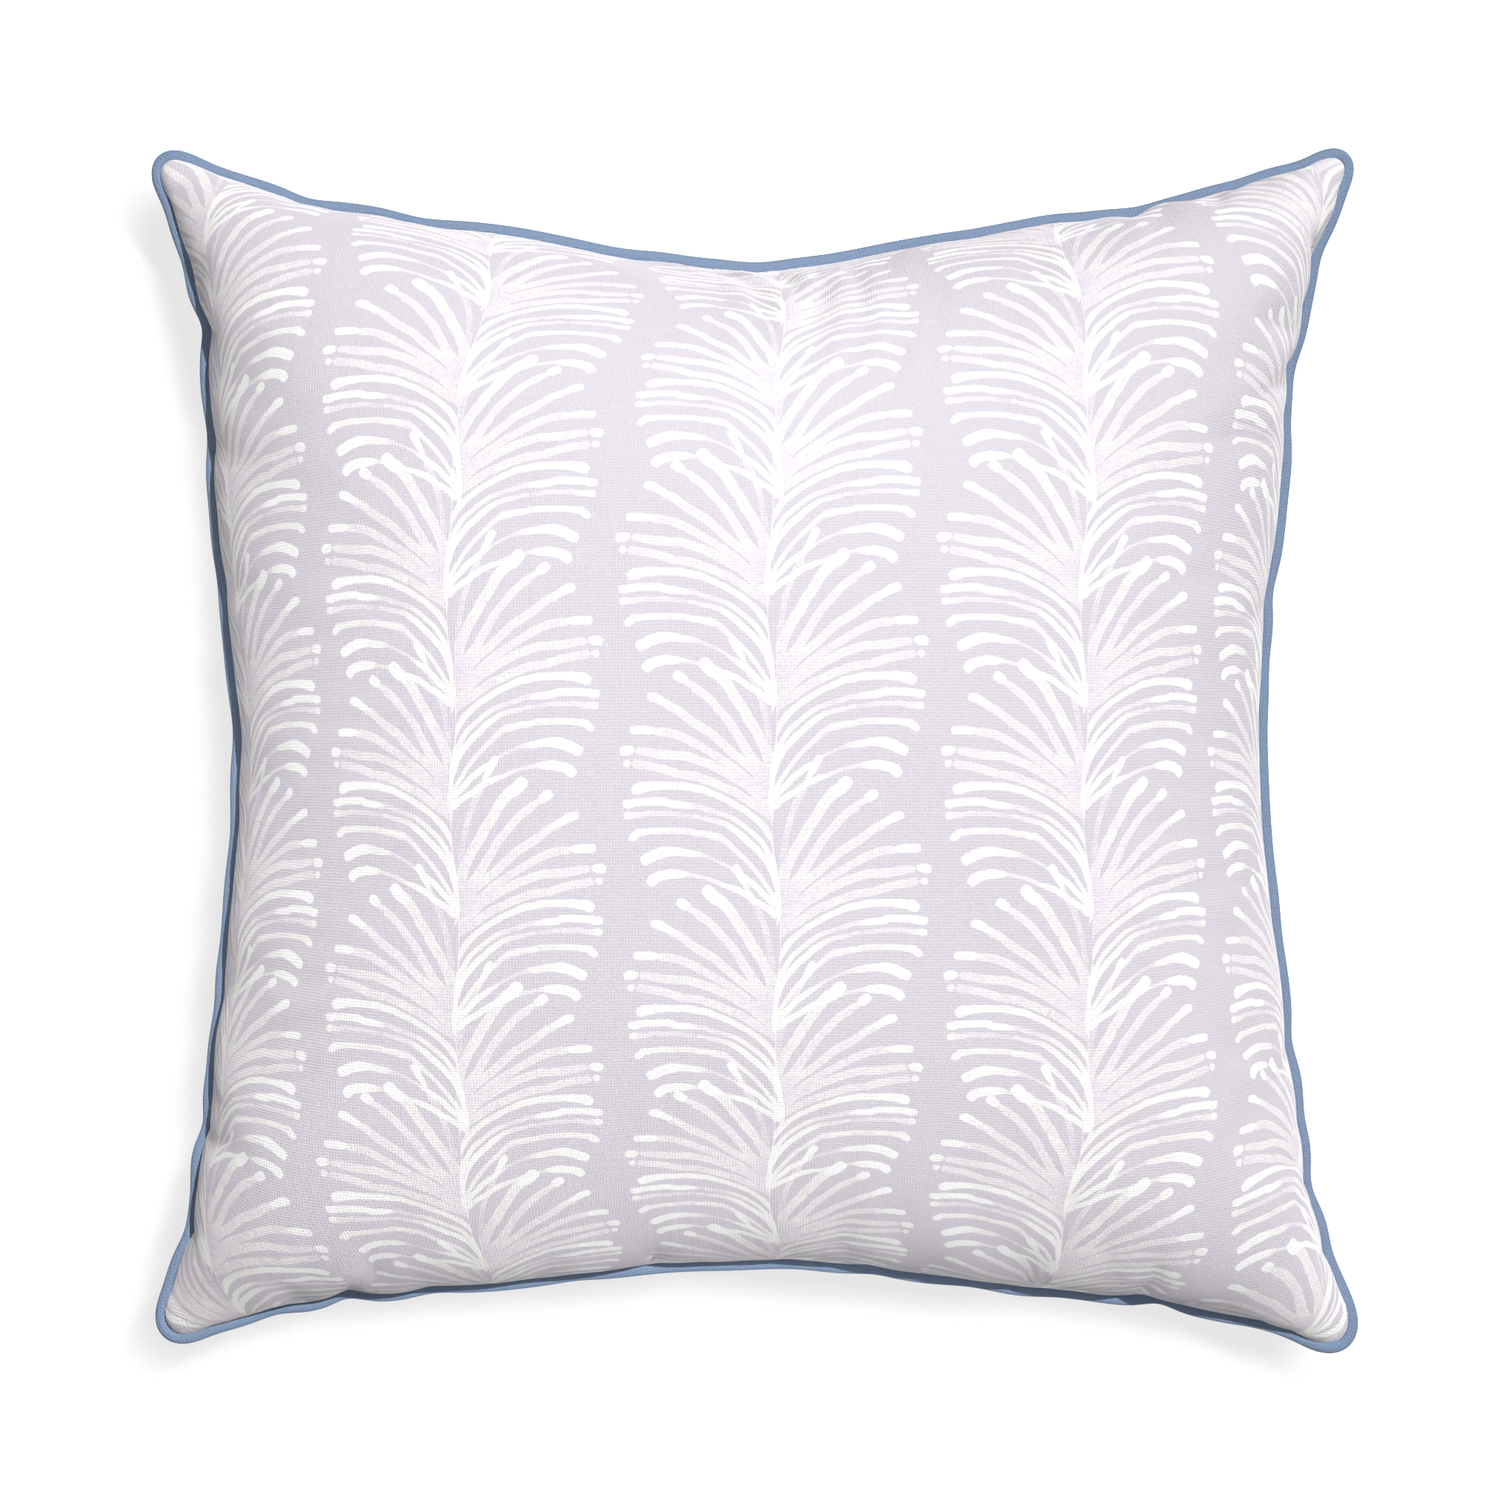 Euro-sham emma lavender custom pillow with sky piping on white background